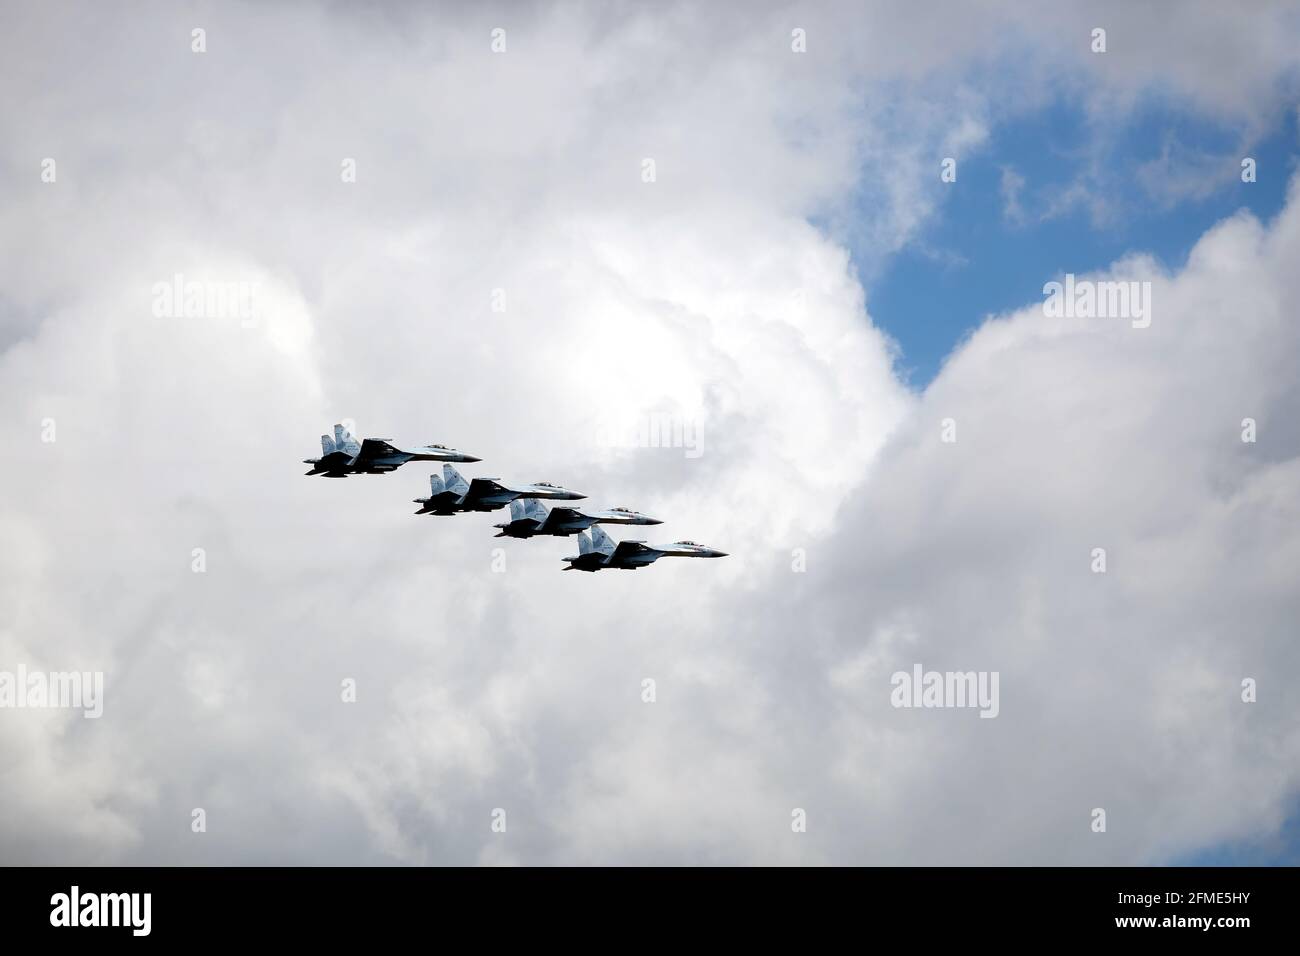 MOSCOW, RUSSIA - MAY 7, 2021: Group of four Russian military supersonic high-altitude interceptors SU-35 in flight on parade rehearsal in cloudy sky Stock Photo